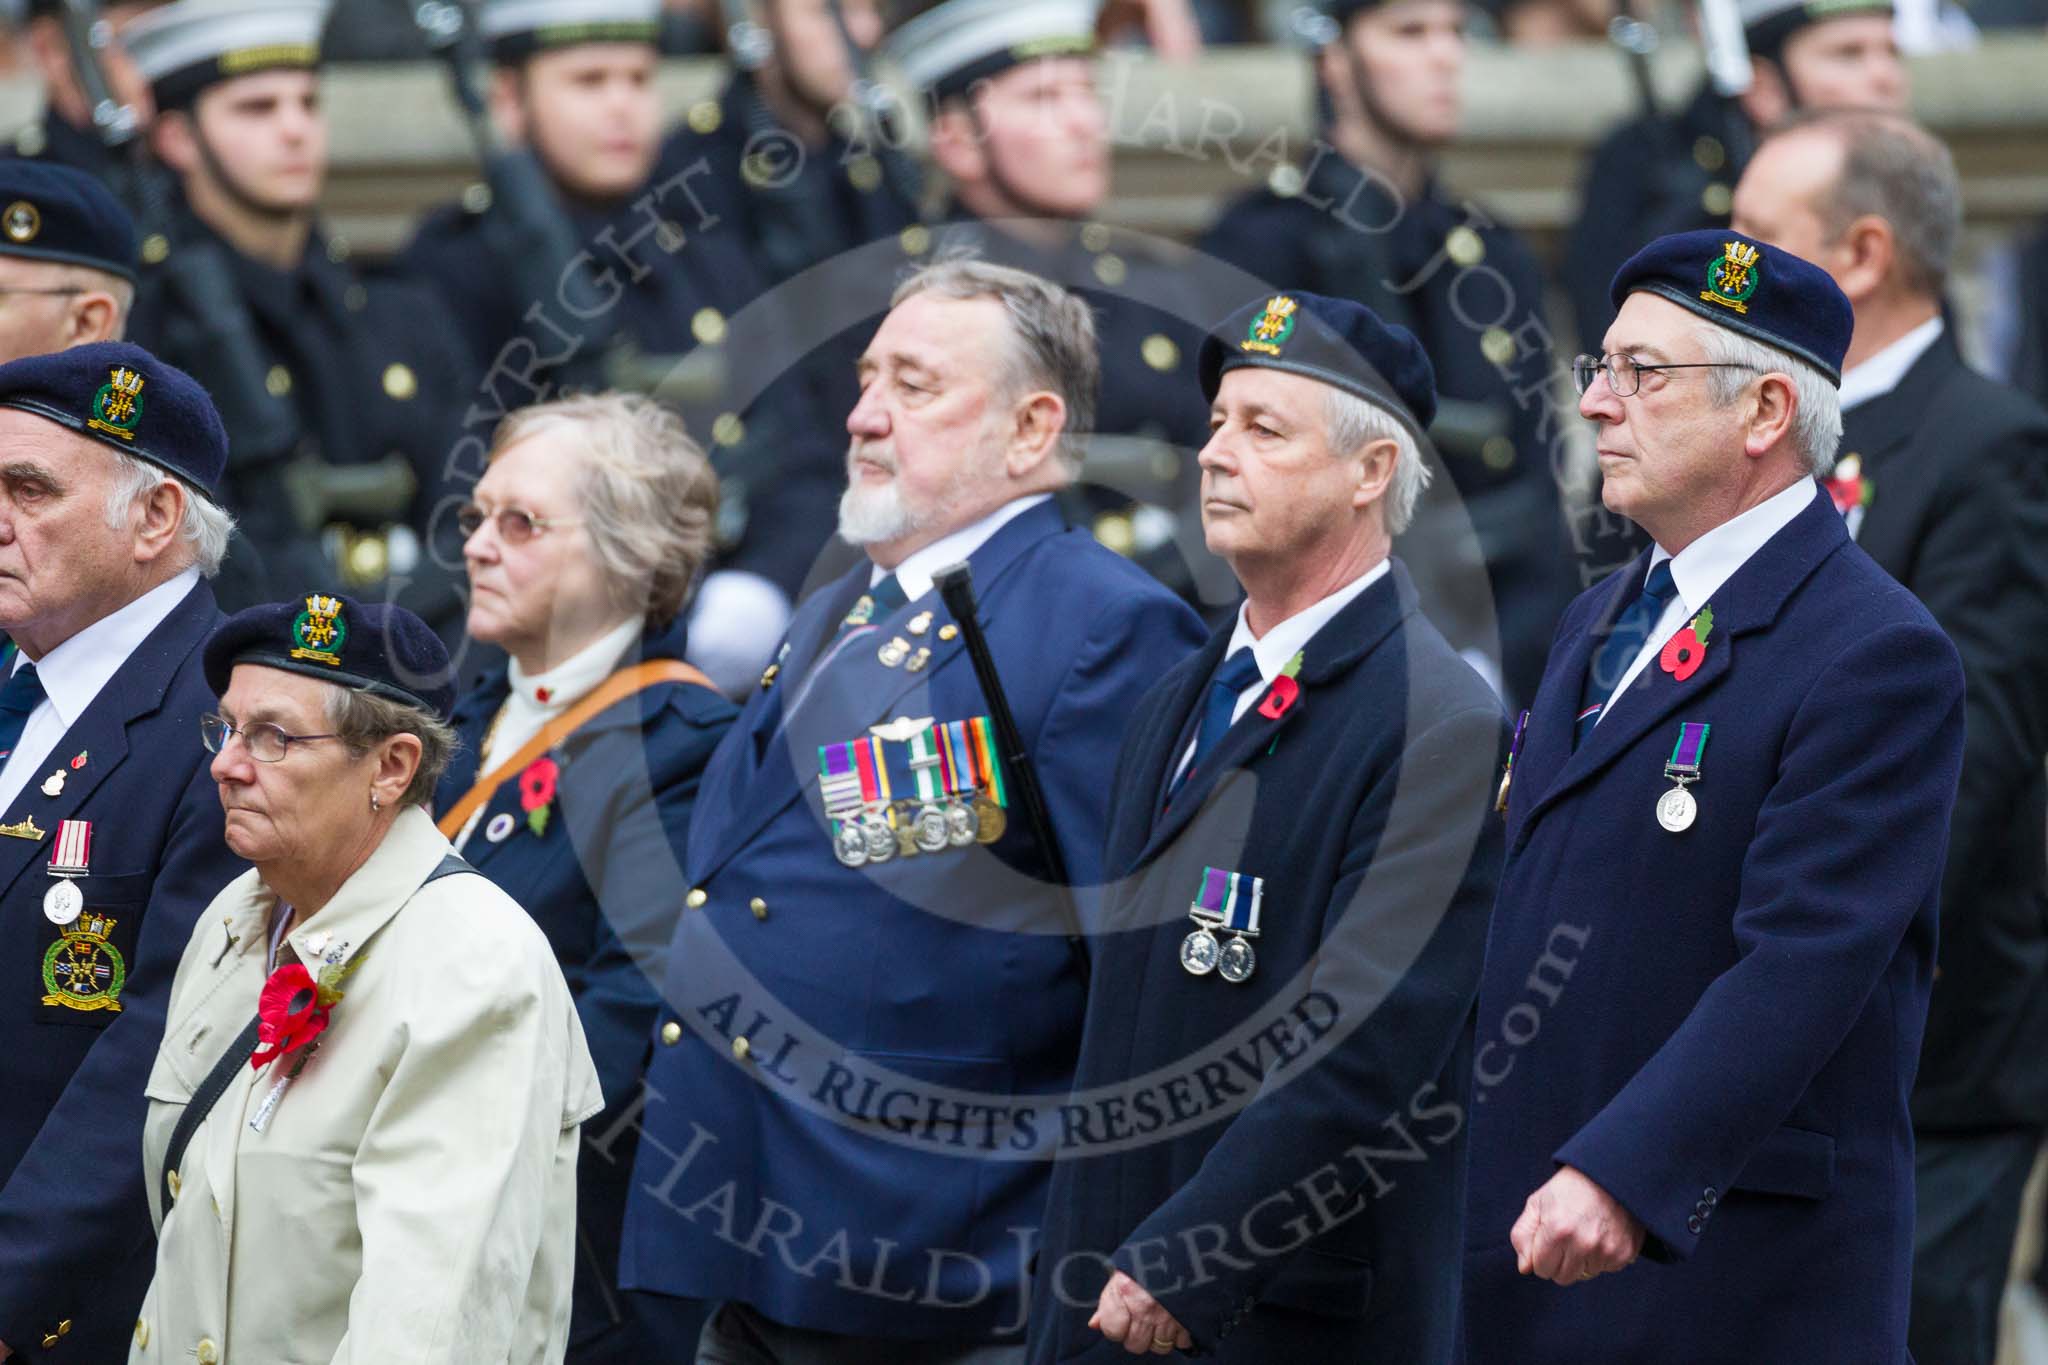 Remembrance Sunday at the Cenotaph 2015: Group E20, Royal Naval Communications Association.
Cenotaph, Whitehall, London SW1,
London,
Greater London,
United Kingdom,
on 08 November 2015 at 12:01, image #916